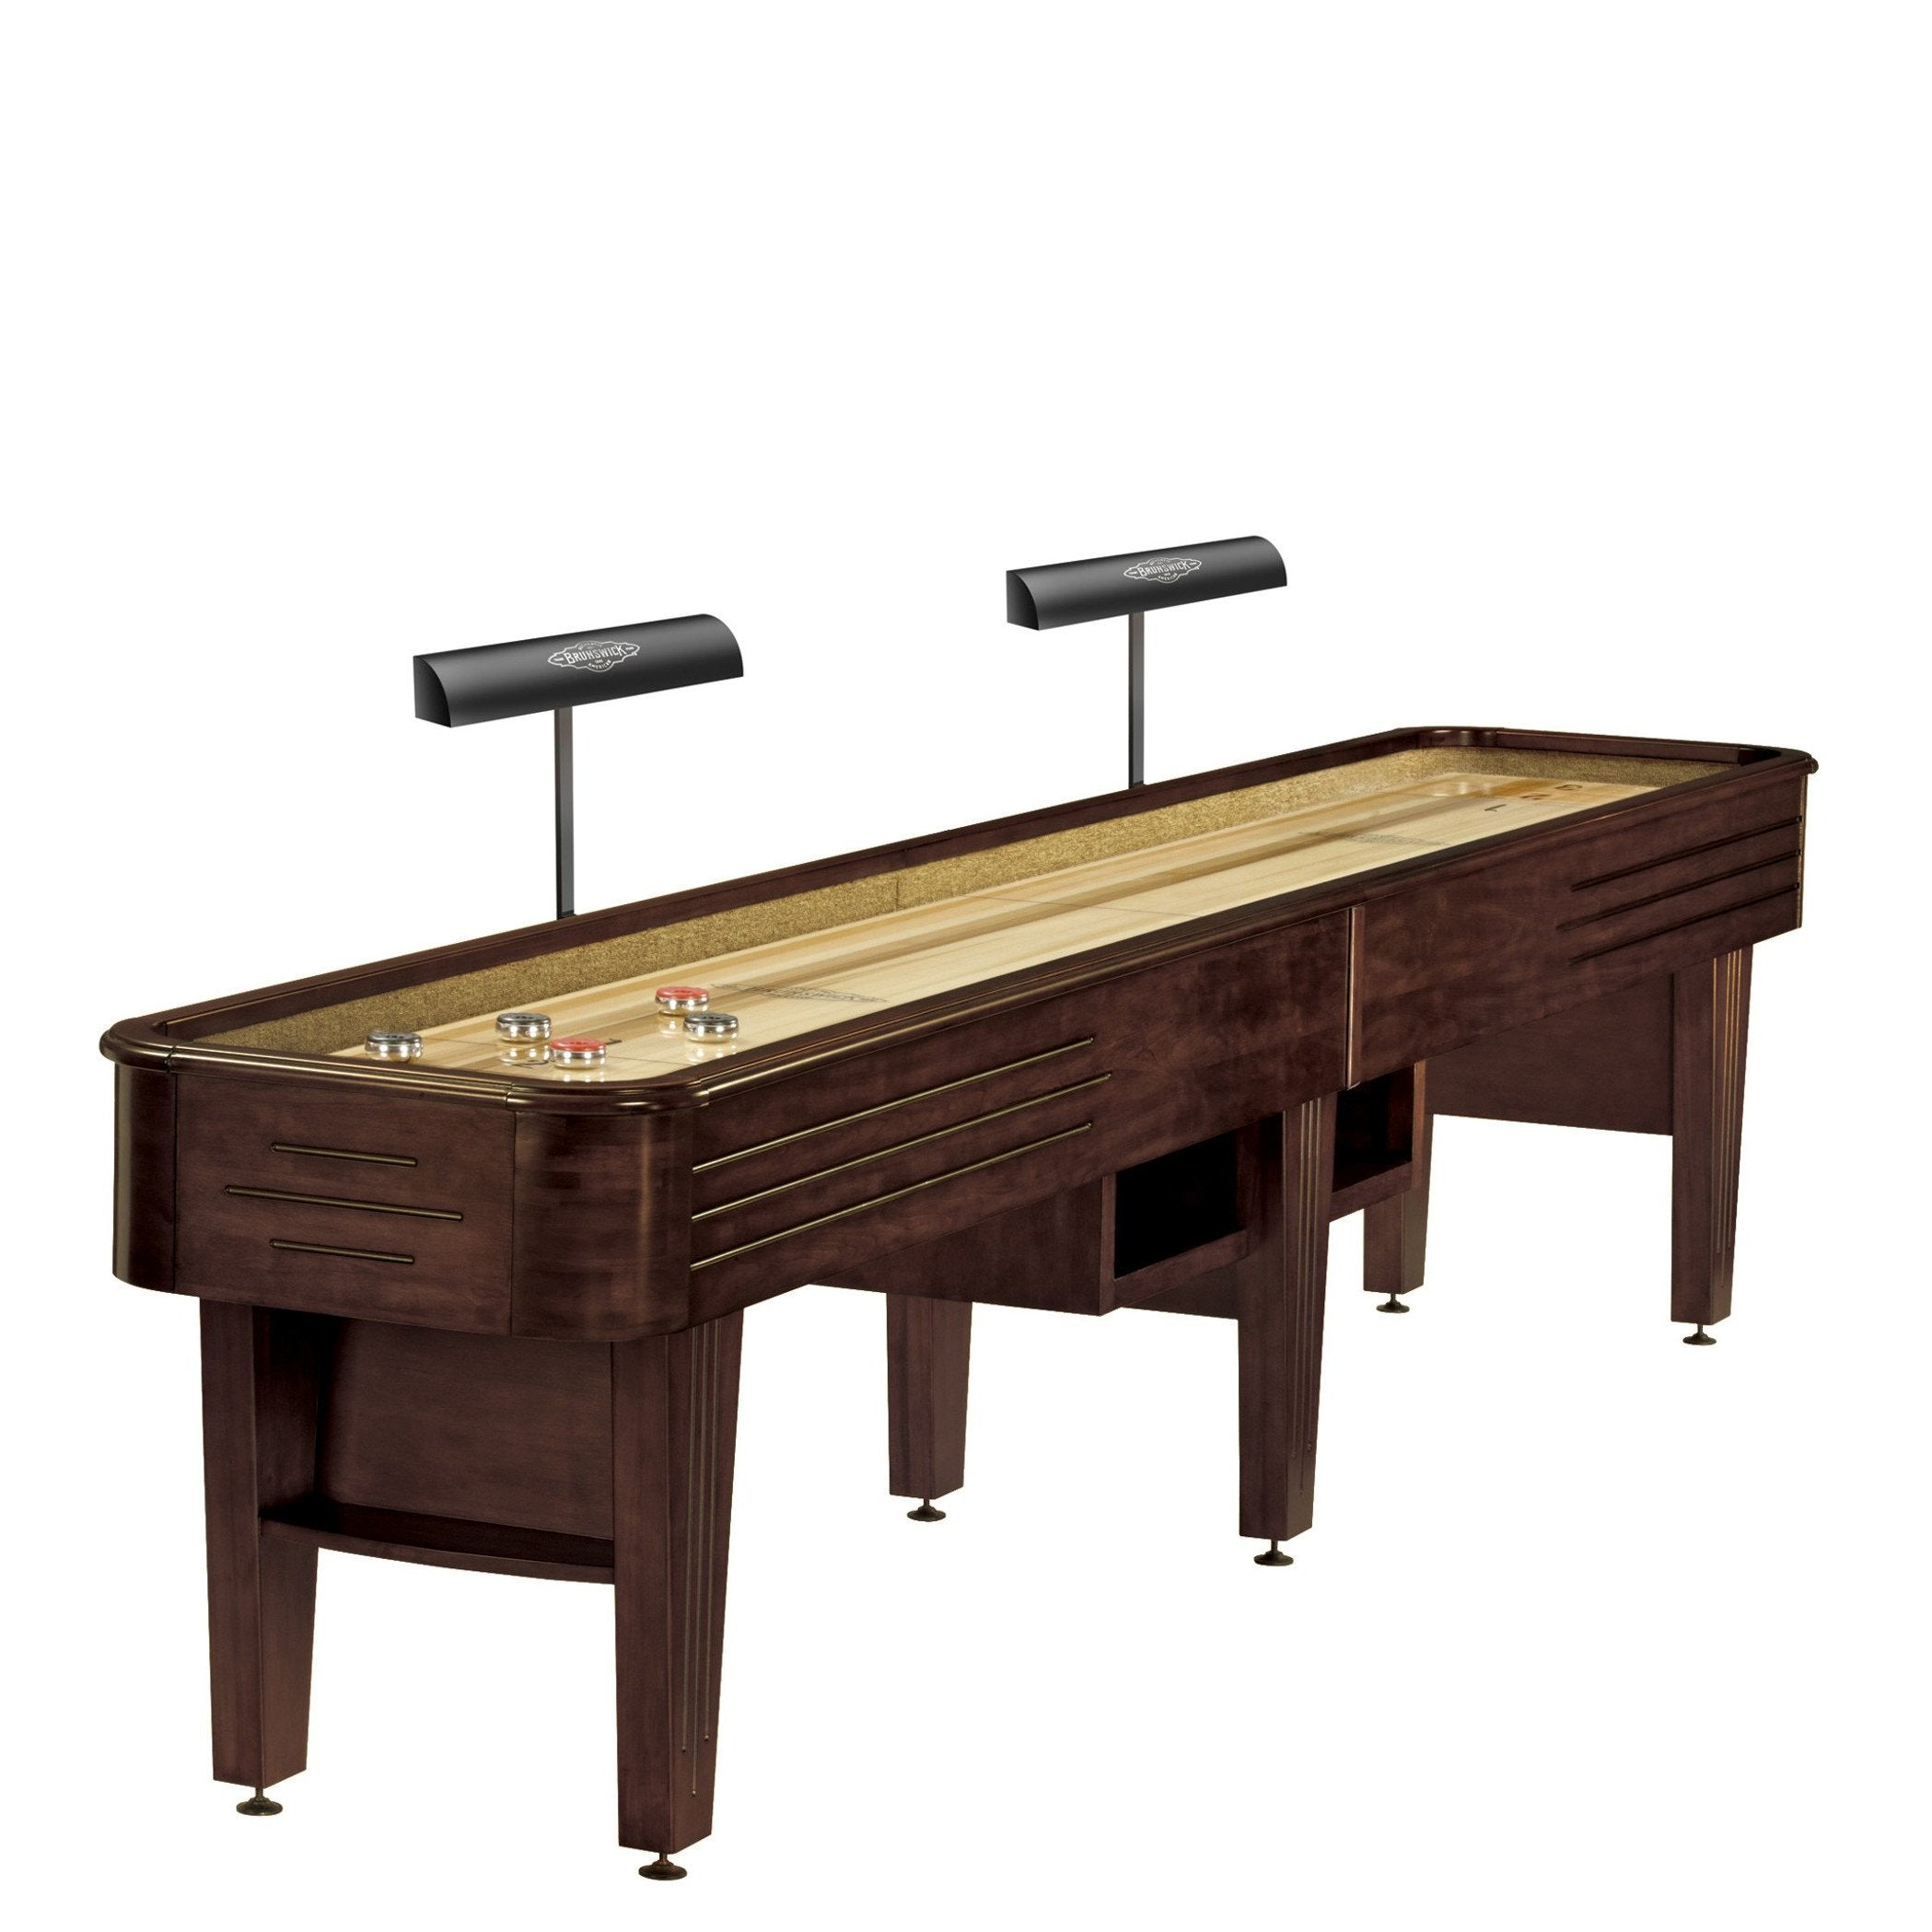 Brunswick Andover II 14' Shuffleboard Table Espresso With Table Lights